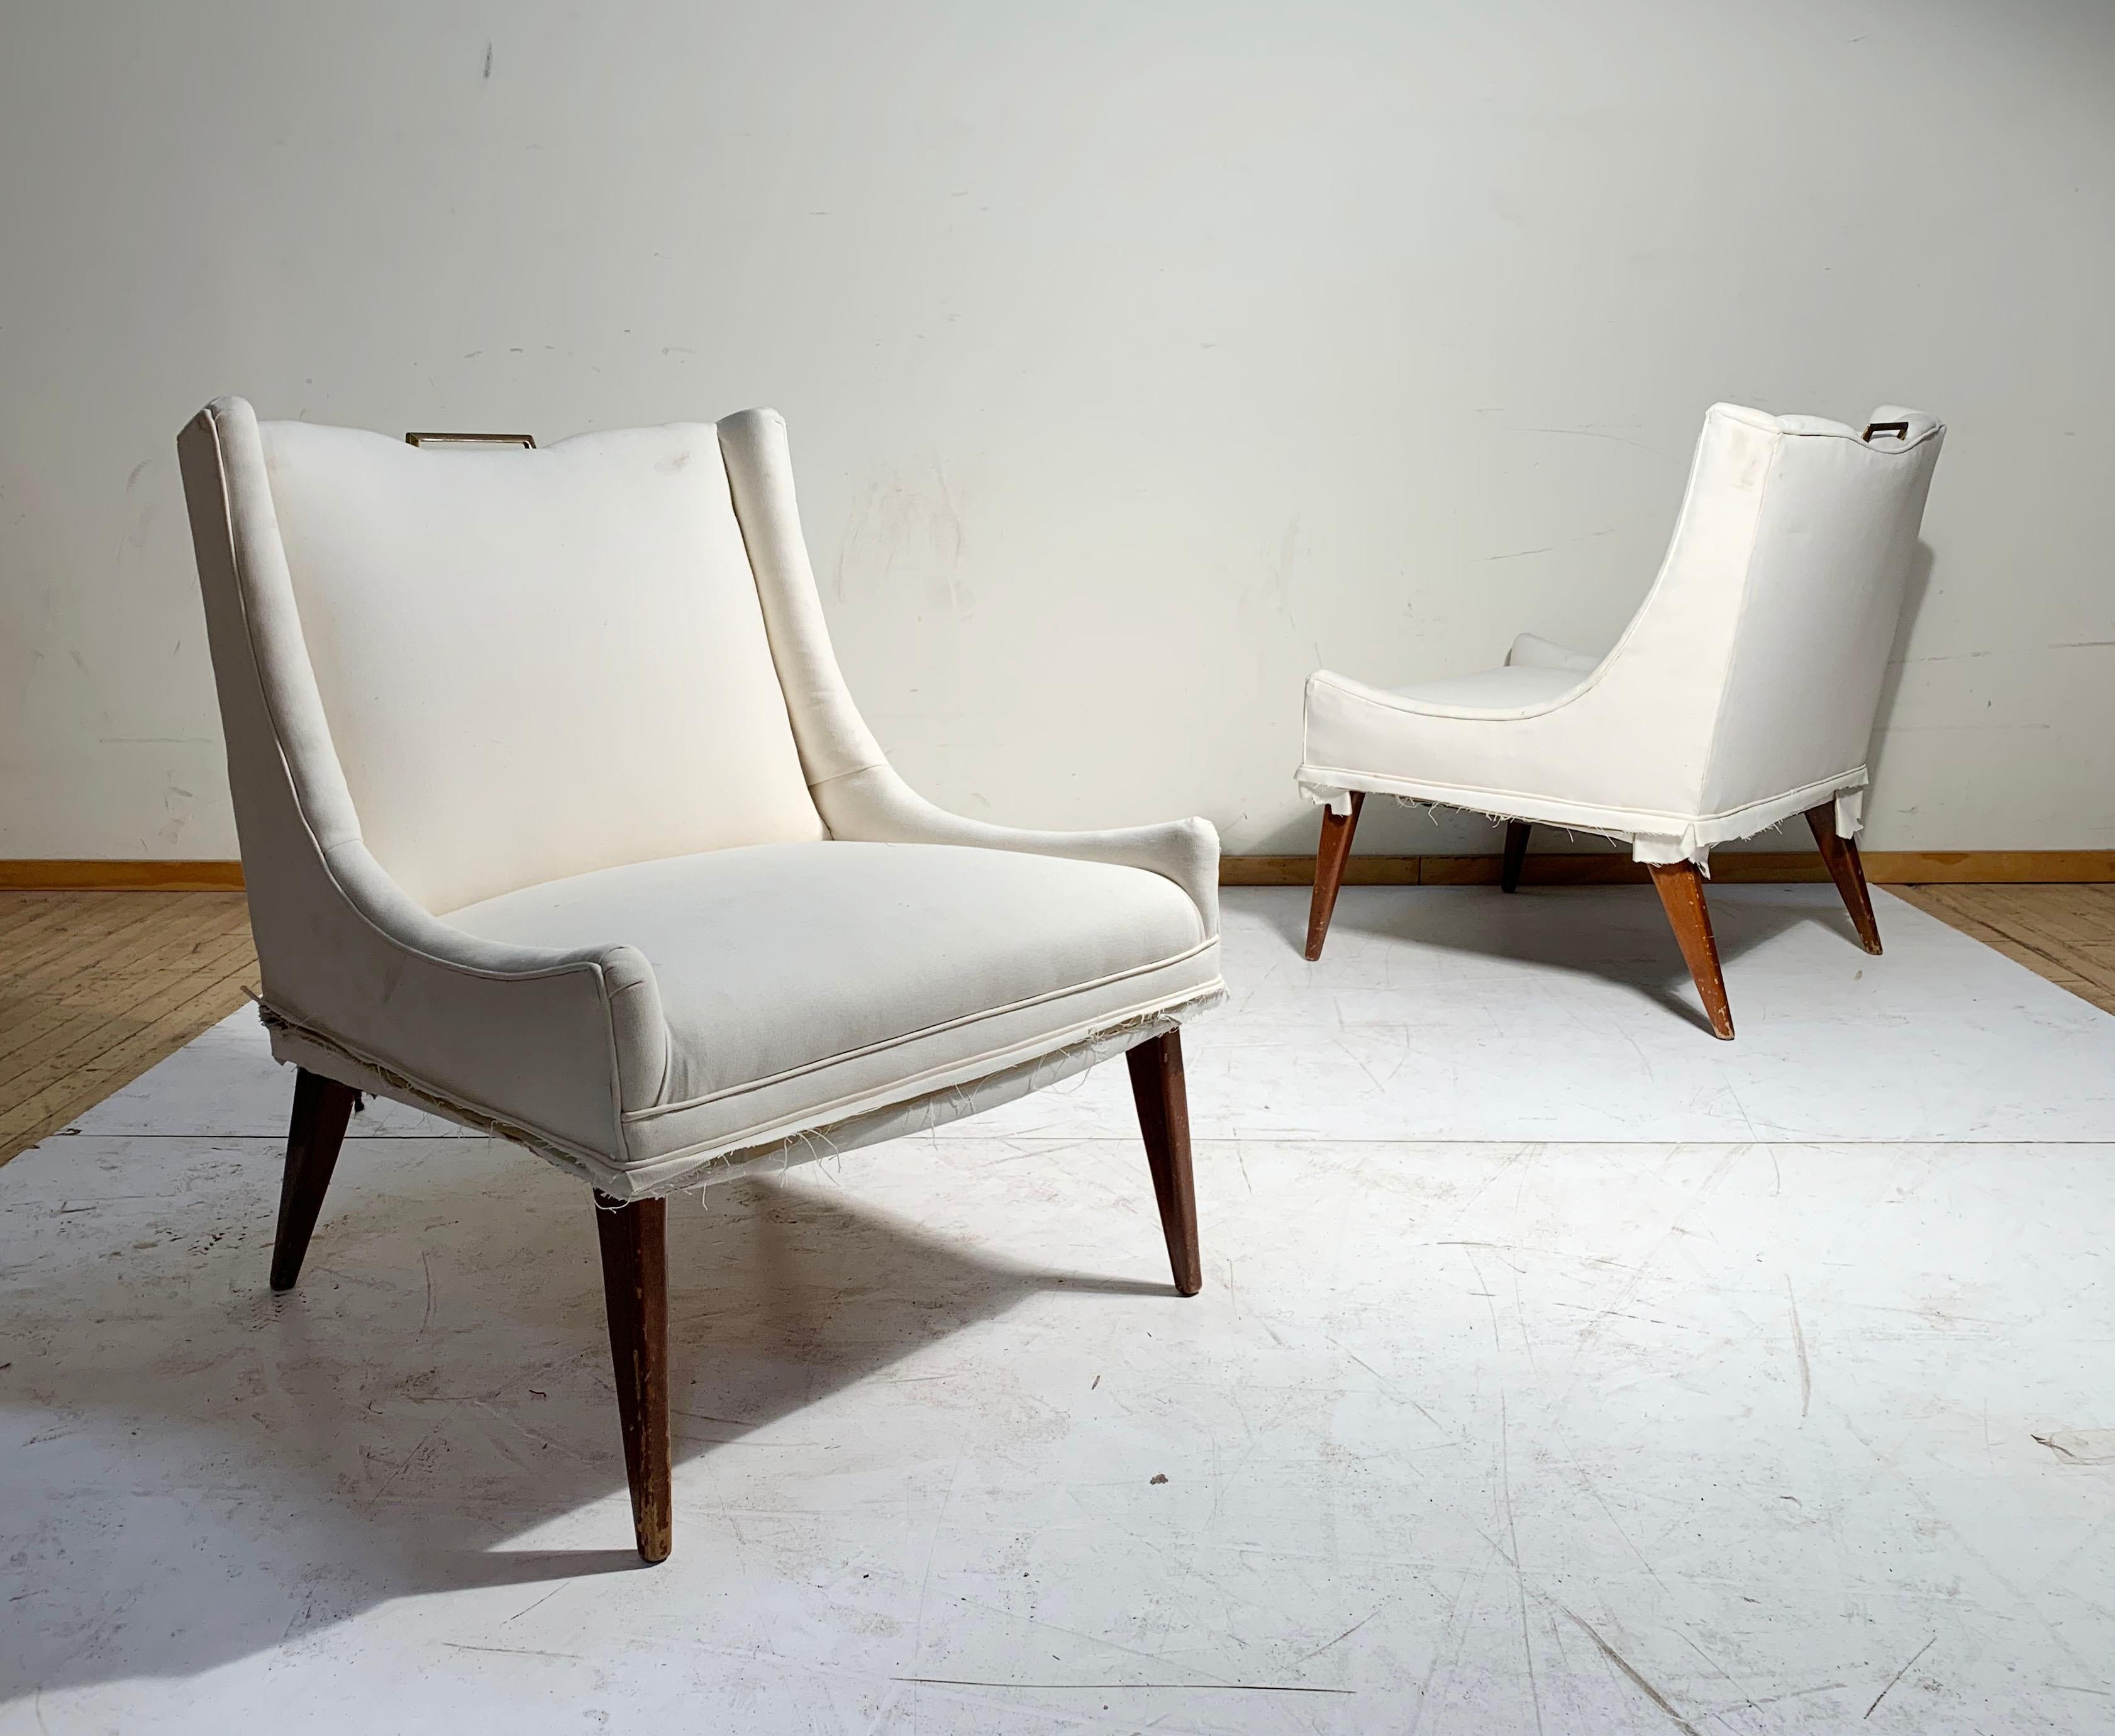 Sexy and swank pair of vintage Mid-Century Modern / Hollywood Regency  lounge chairs in style of Milo Baughman  Harvey Probber. Very good design. No labels attached. Of the period. Nice patina to brass handles. Could possibly be Italian in origin.